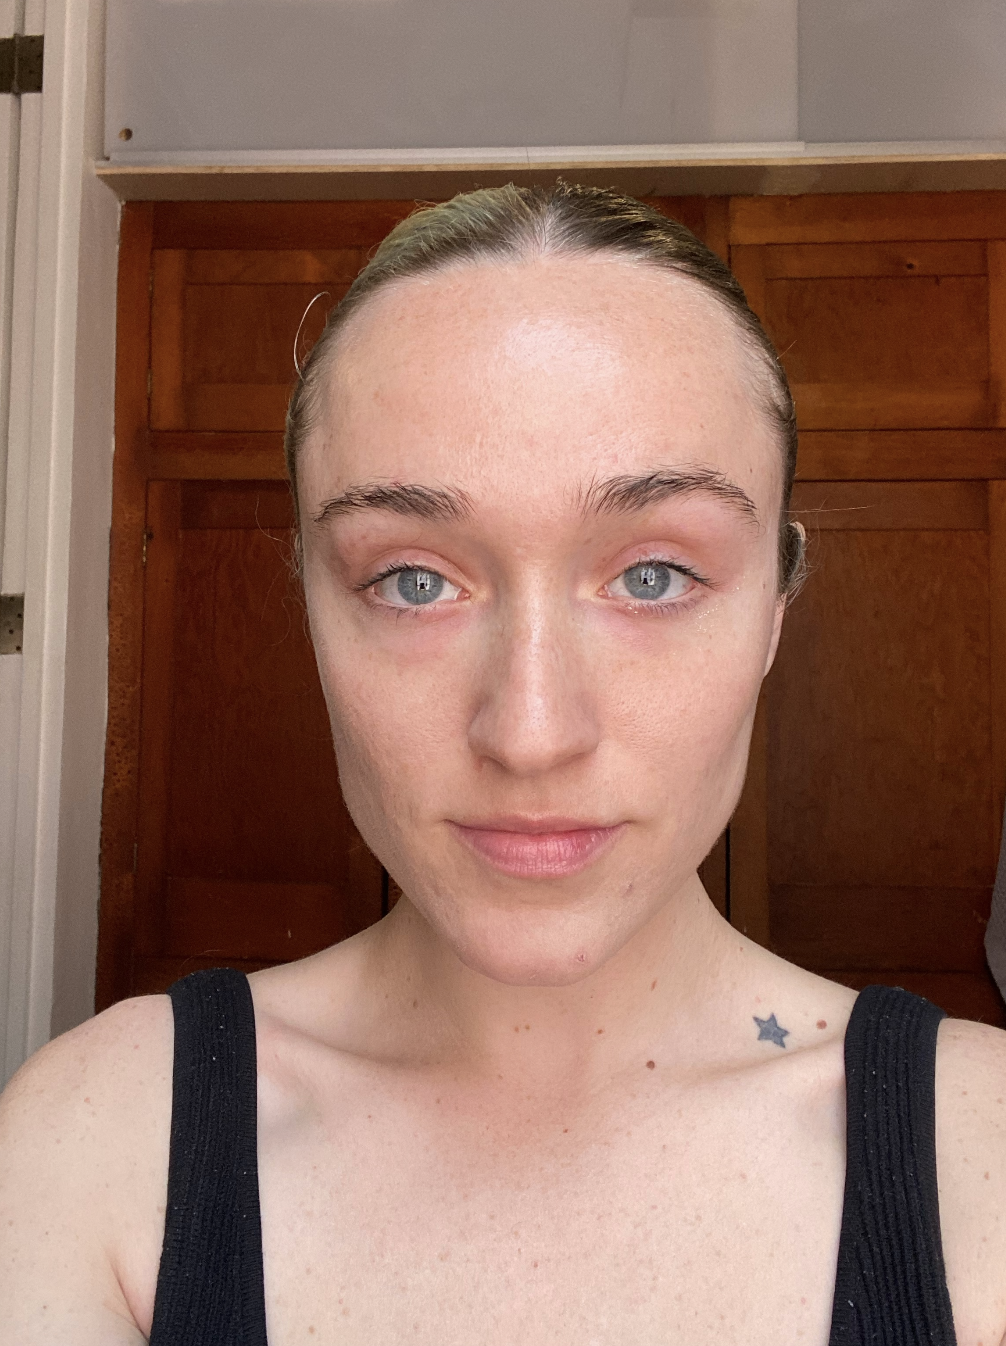 The author after the treatment with a smoother under eye area